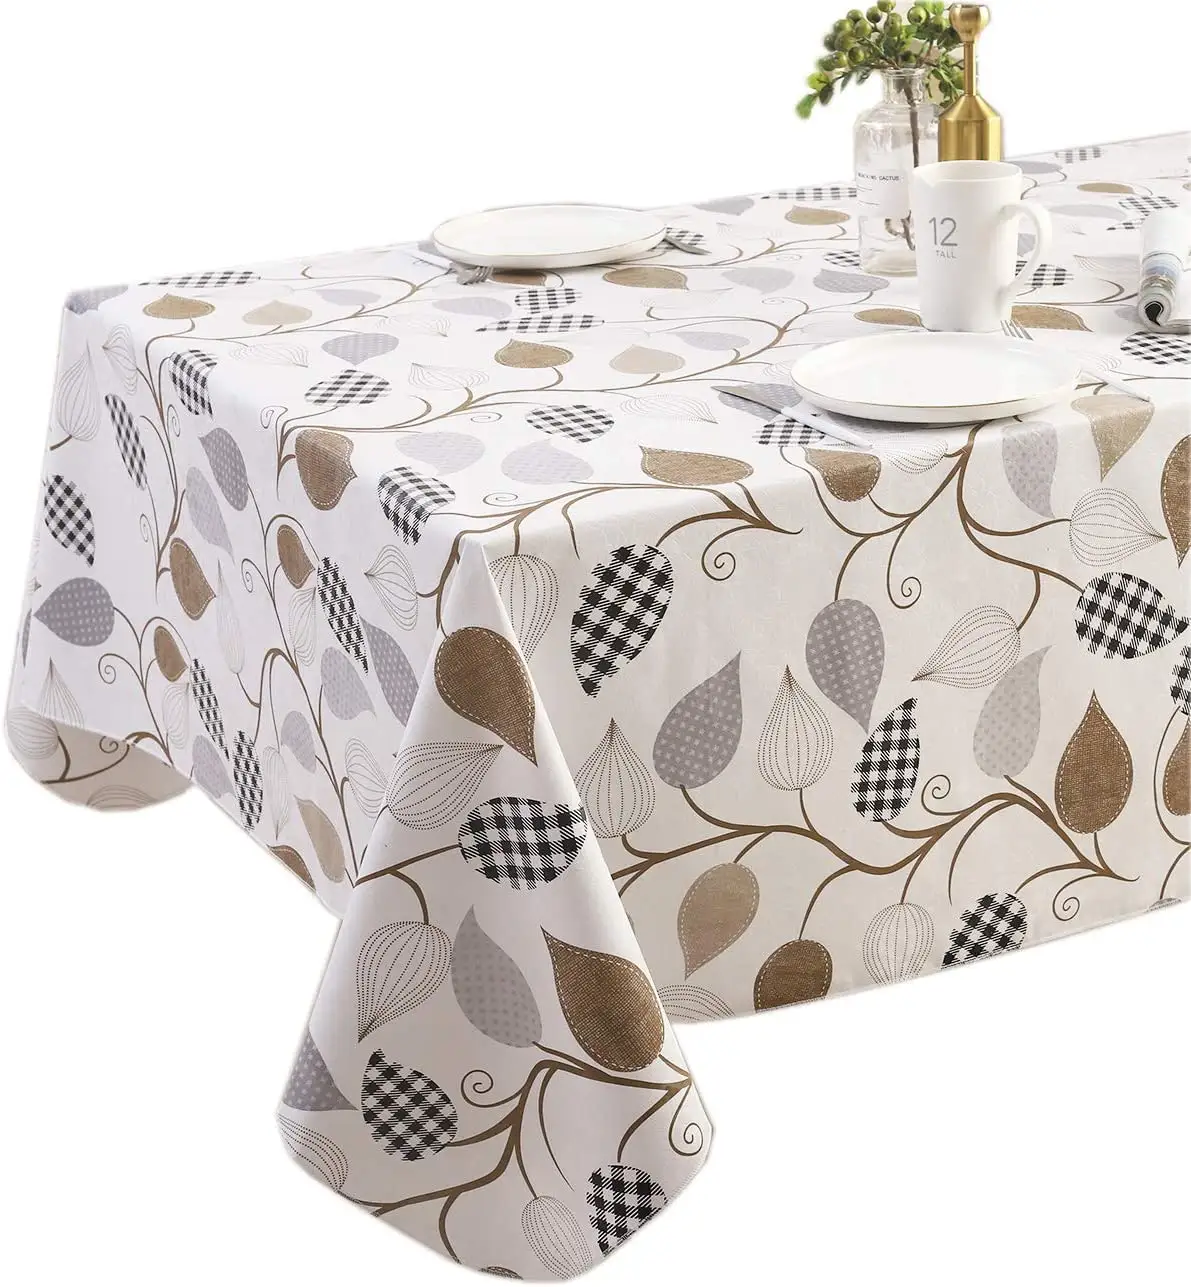 New Digital Printing Vinyl Tablecloth with Flannel Backing Waterproof Stain-Resistant Wipeable for Indoor and Outdoor Kitchen Accessories